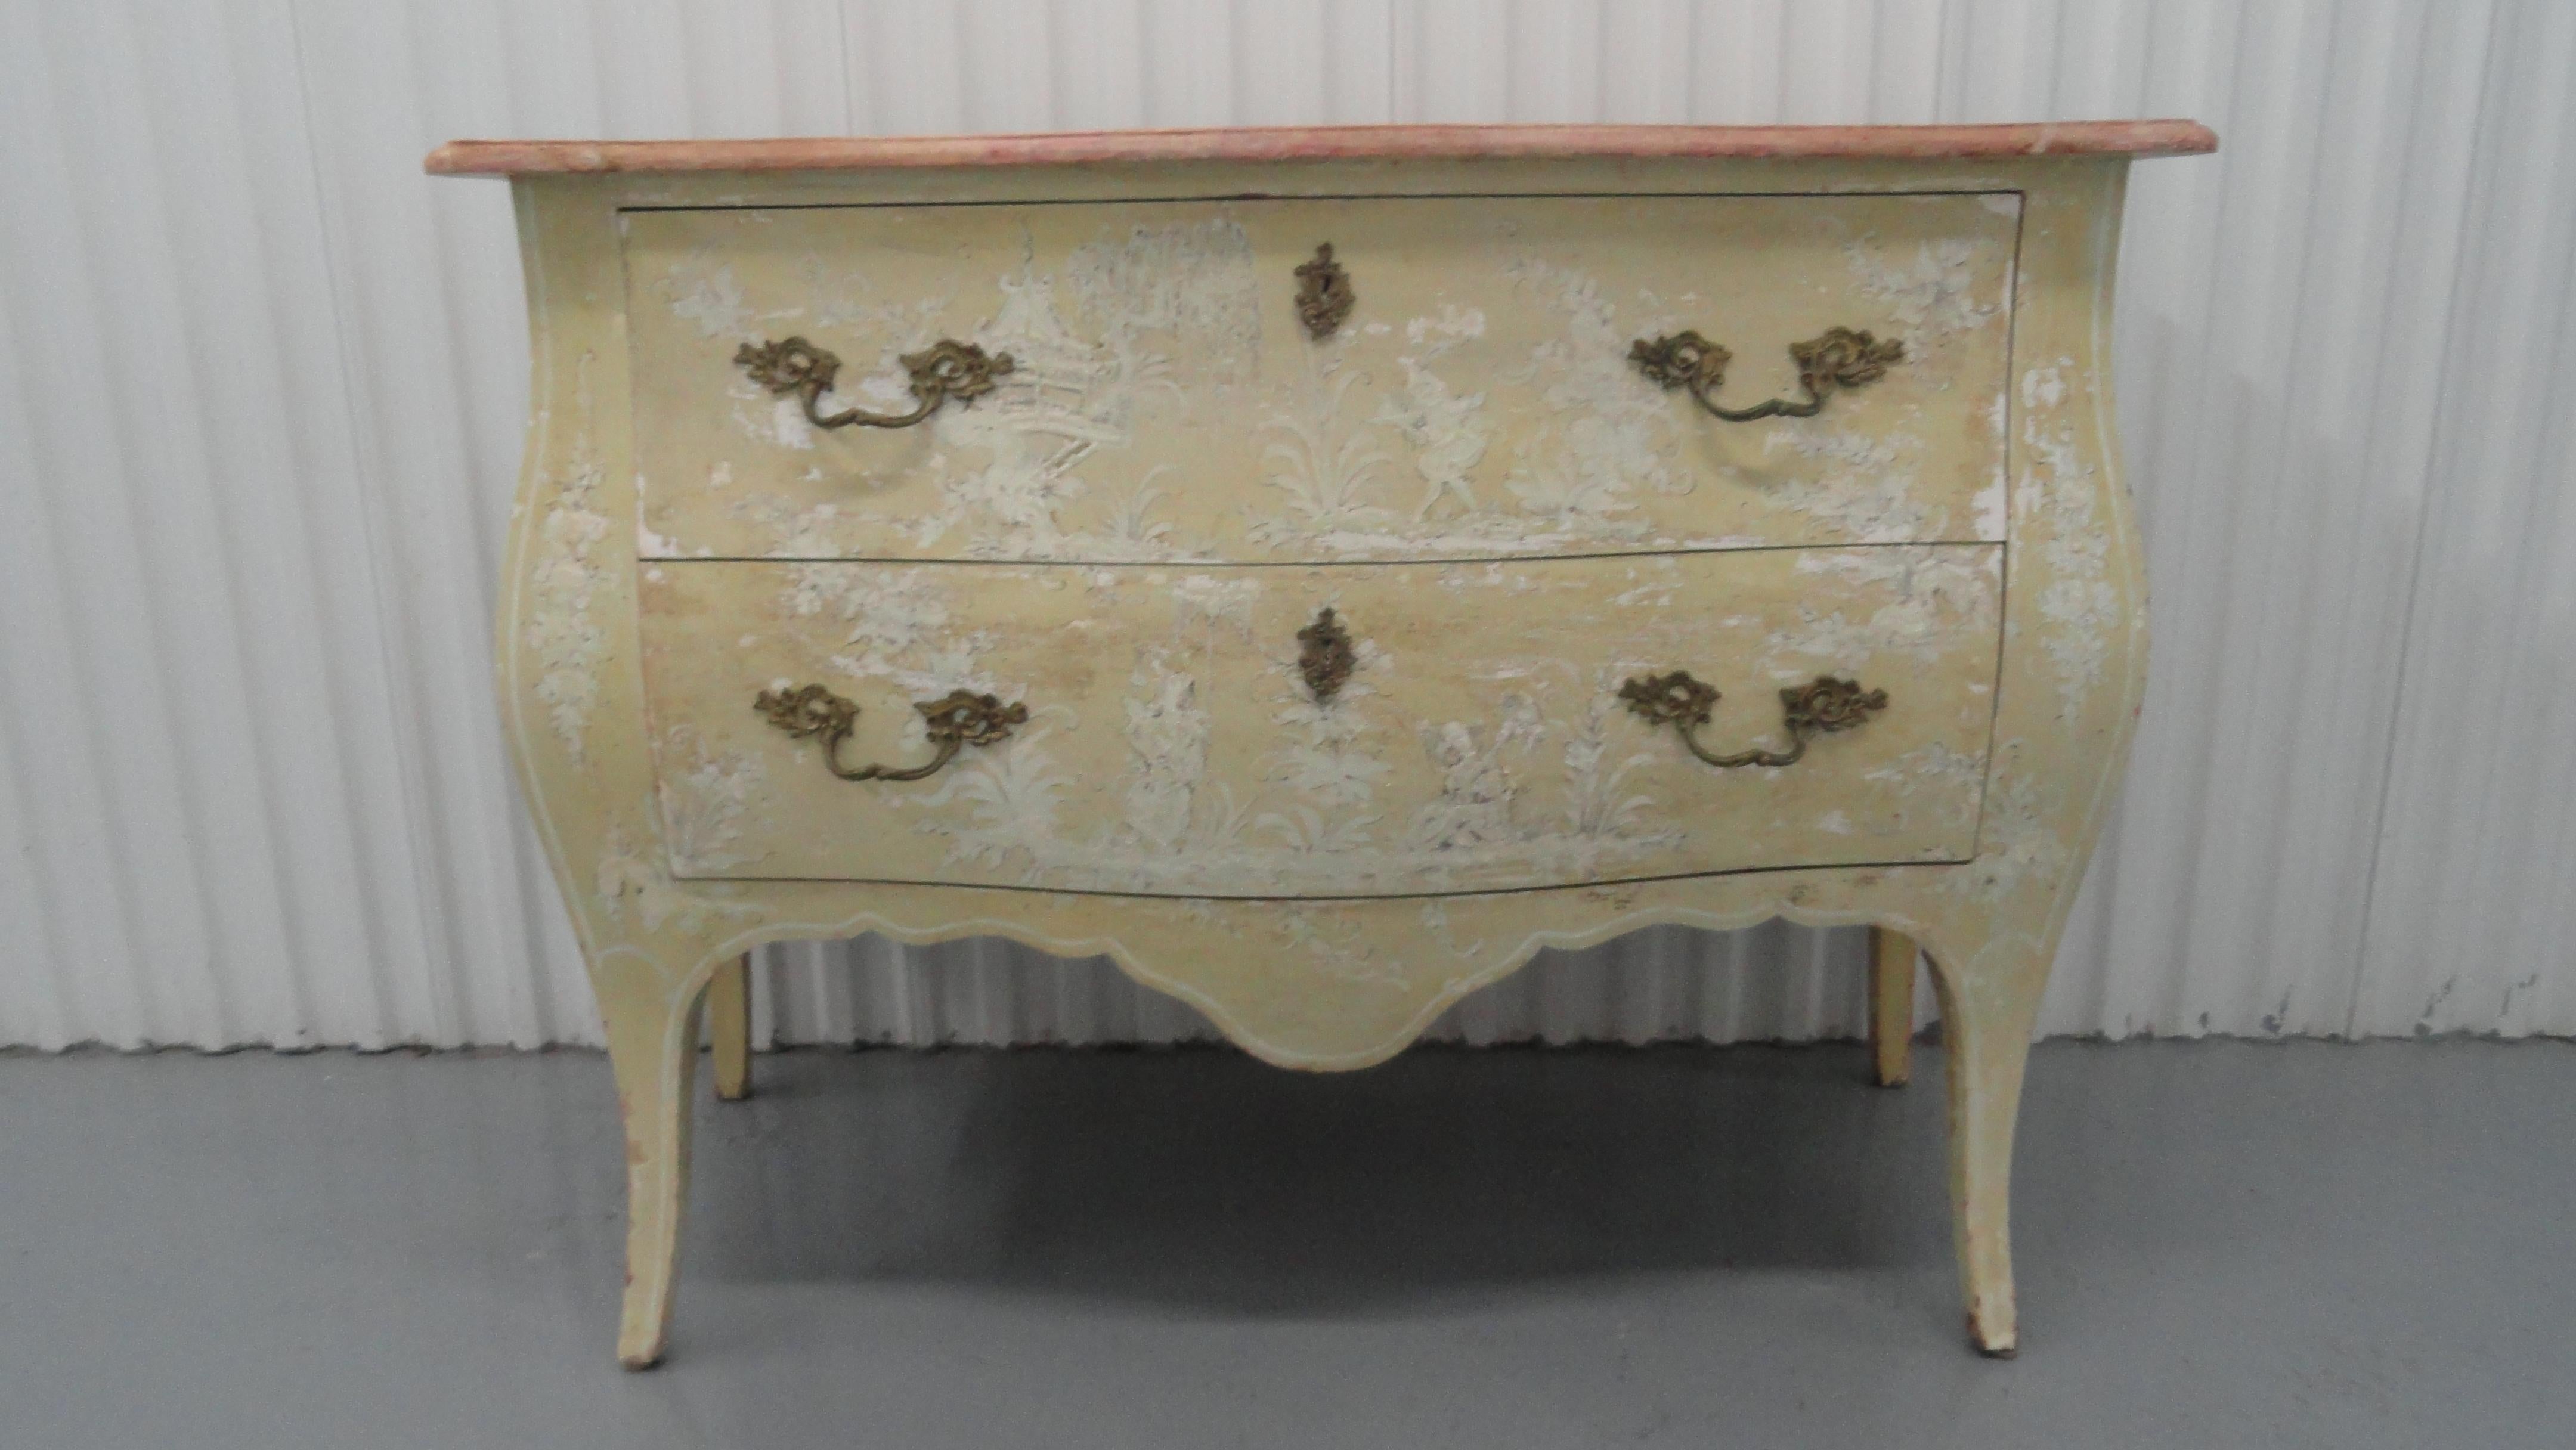 Fantasy painted Chinoiserie two-drawer bombe chest. Classic French bombe shape on this midcentury chest. Original hardware. Paintings are white and gray on an almond background. Beautiful age and patinazation.
The top is a trompe-l'oeil fantasy